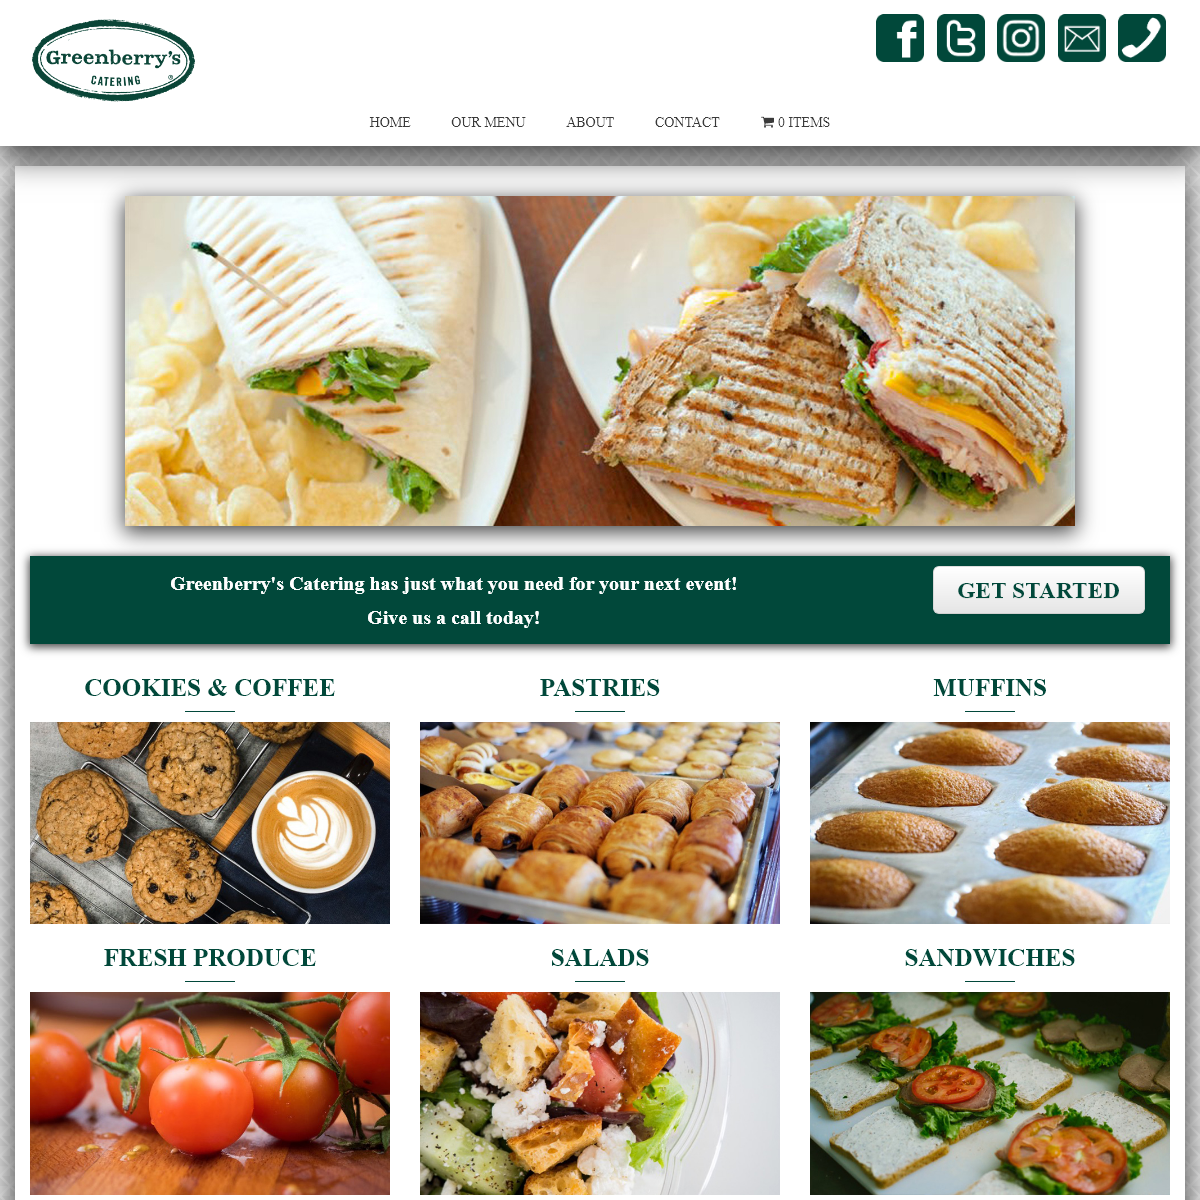 A complete backup of greenberryscatering.com